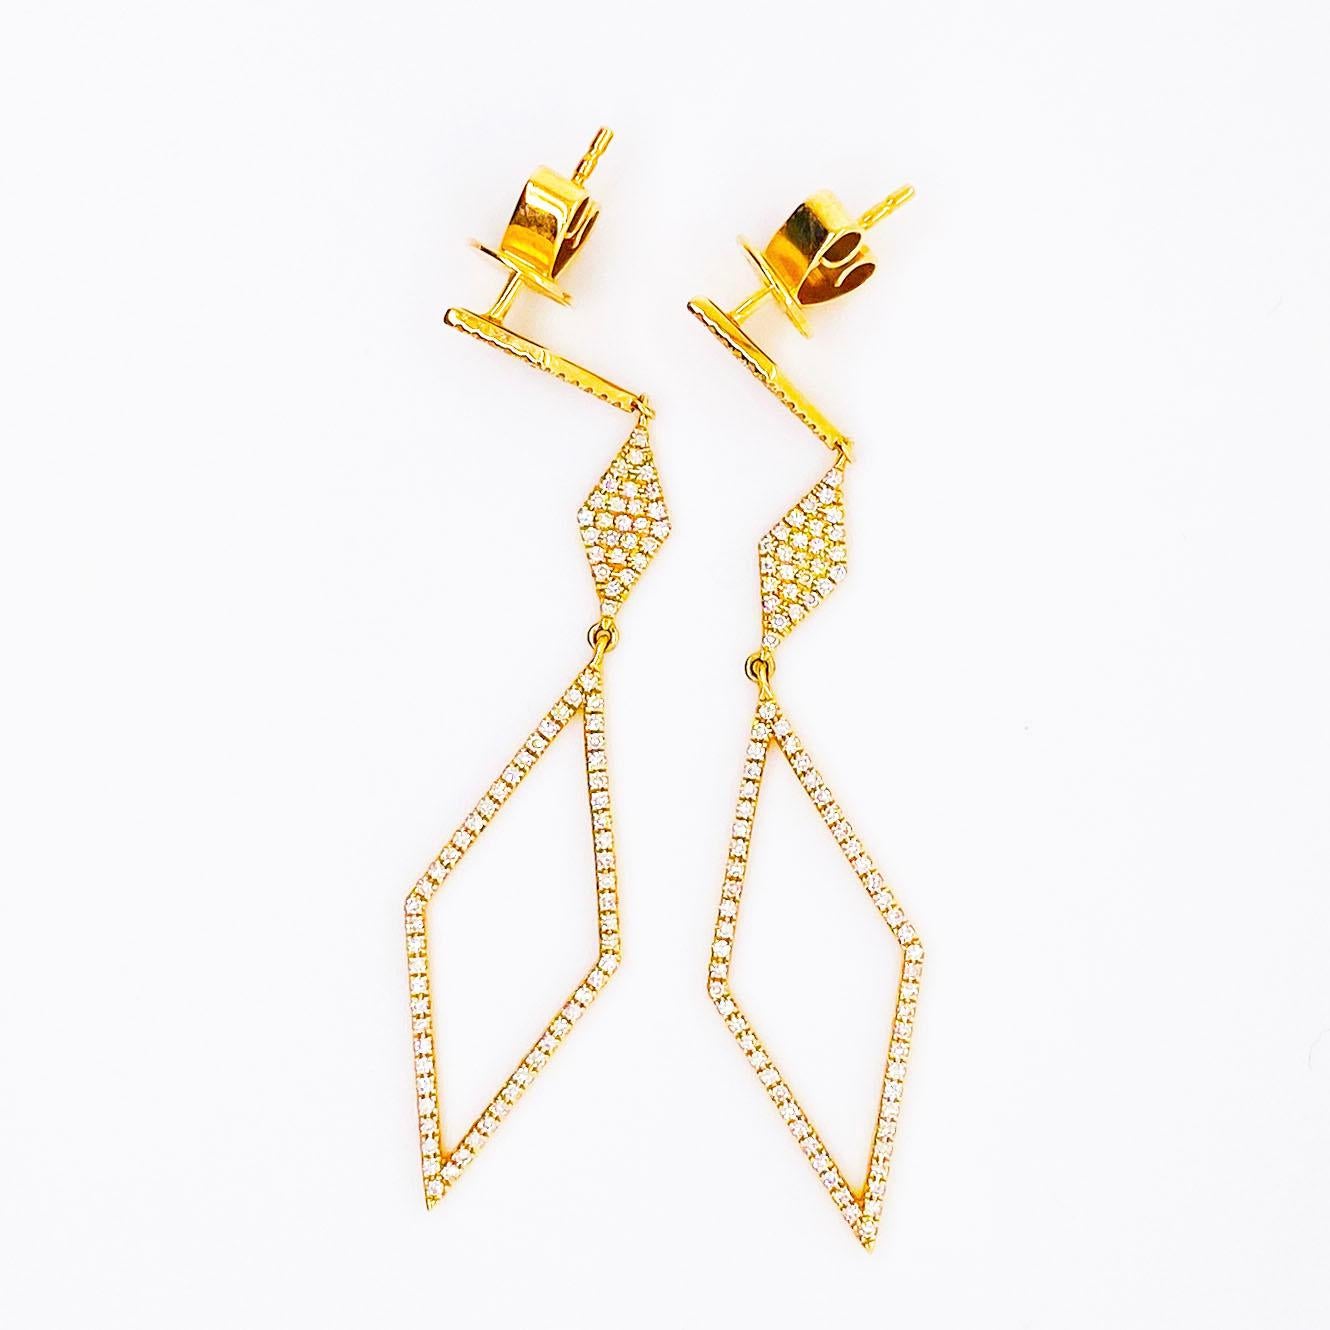 14K Yellow Gold Diamond Shape Diamond Dangle Earrings:
These drop earrings are stunning!  Created with a stylish woman in mind, the three diamonds alternate from an open diamond shape to a solid diamond shape and back to the open diamond shape.  The